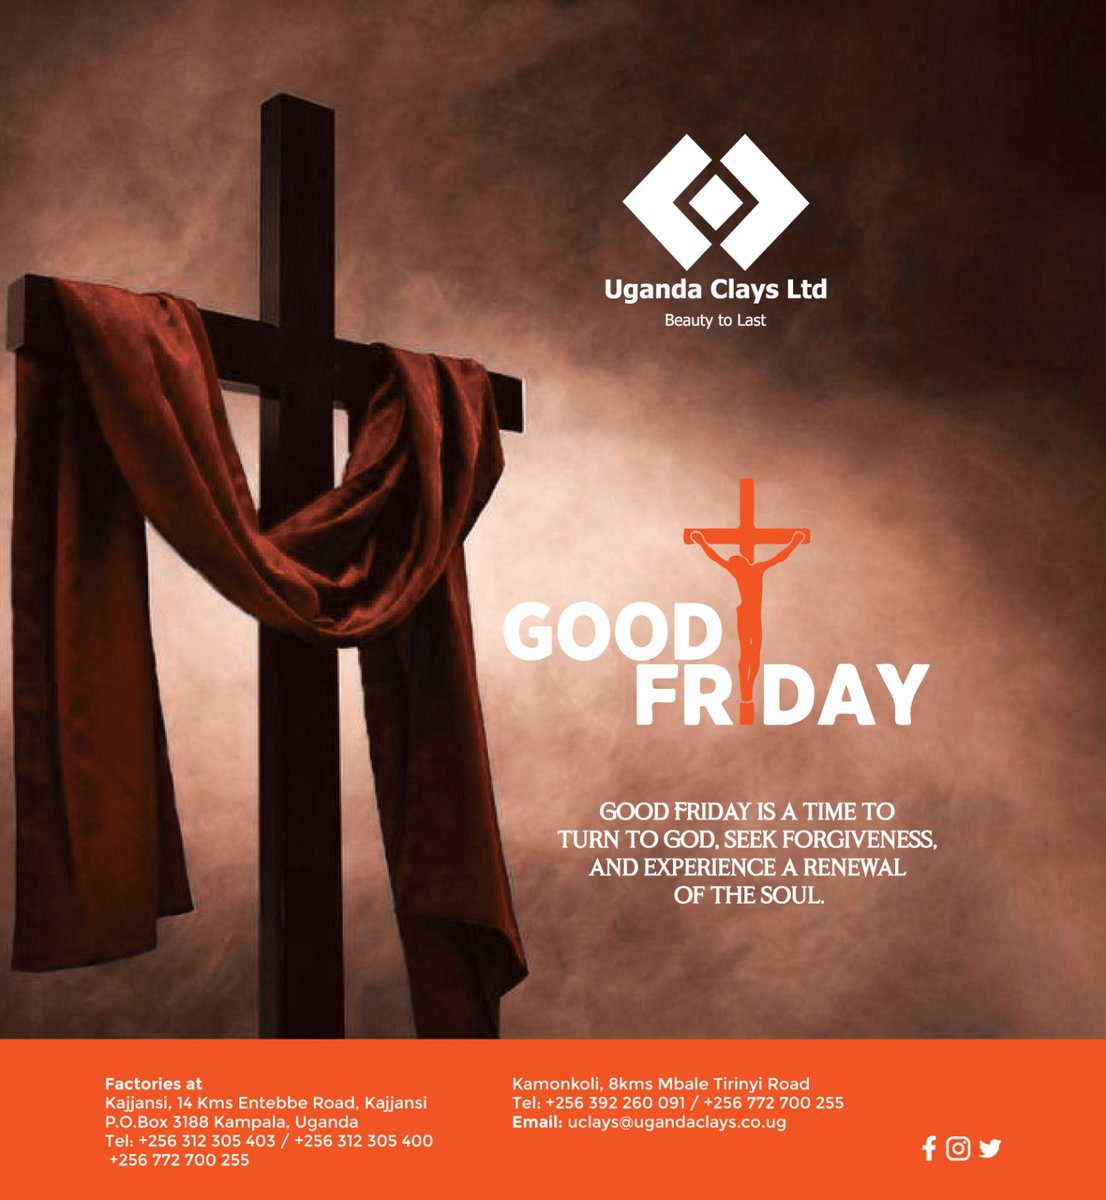 As we observe good Friday, may we be reminded of the immense love of God and the redemption it brings. Have a solemn and reflective day.